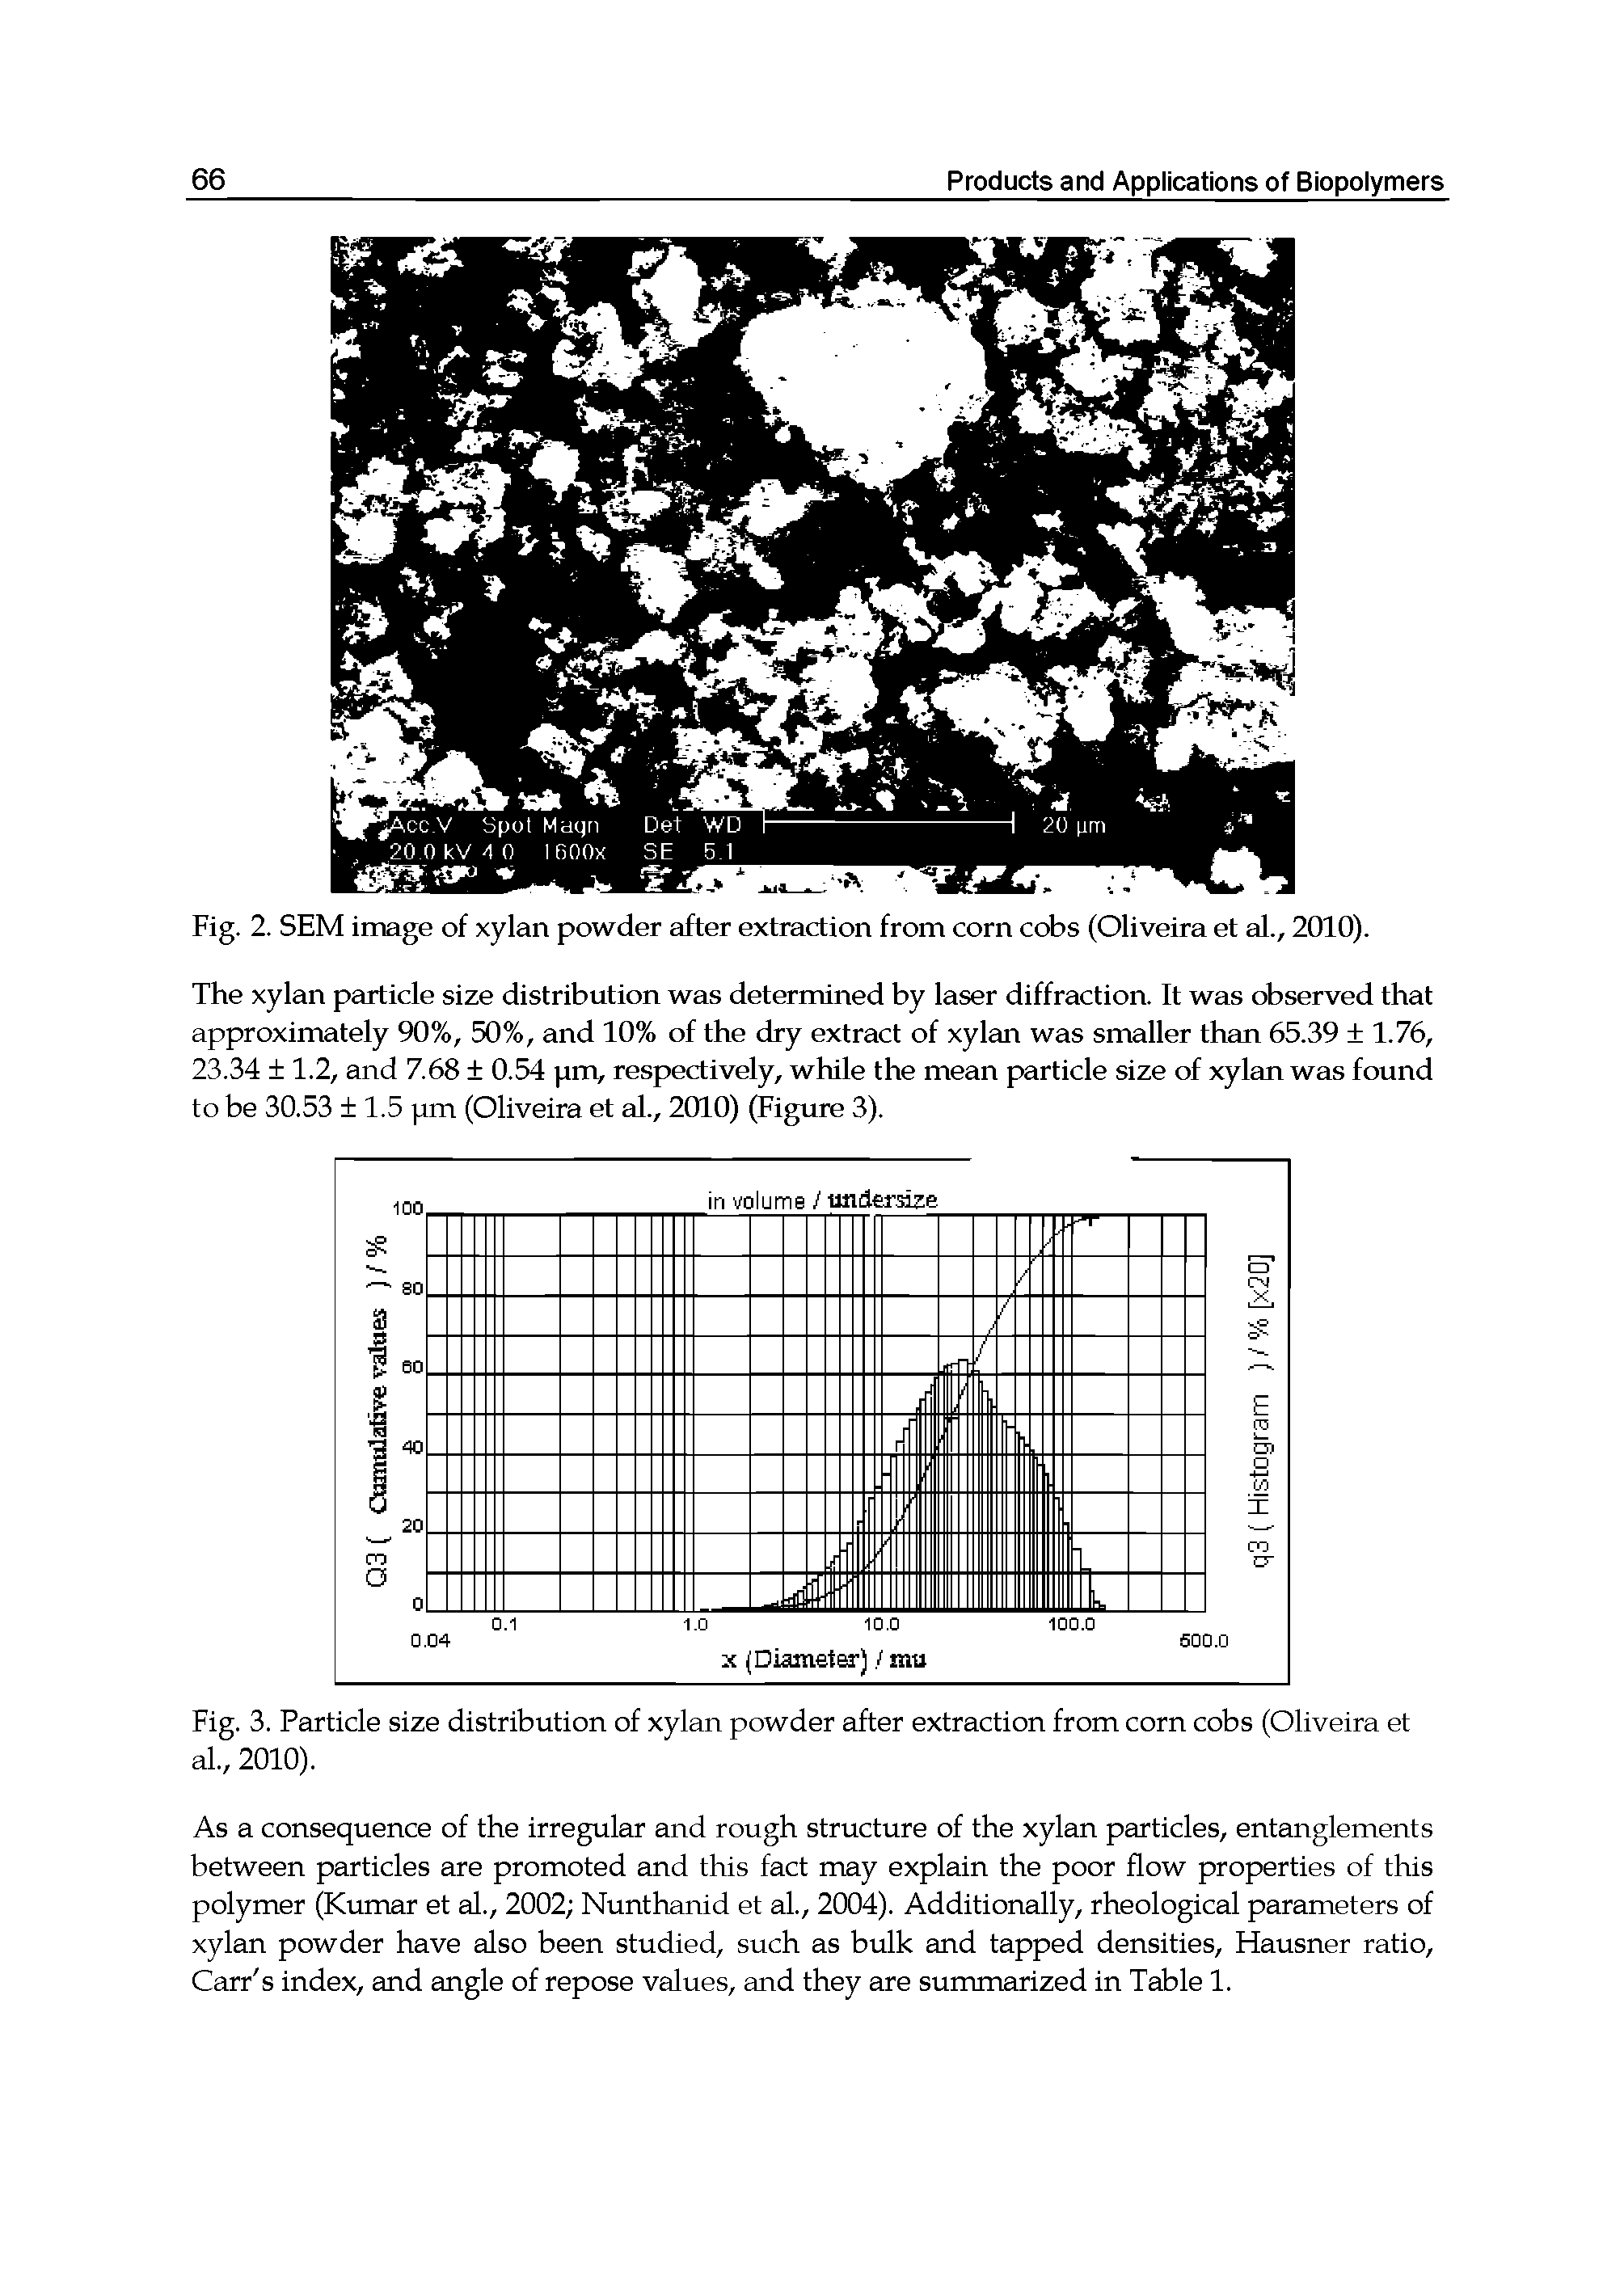 Fig. 2. SEM image of xylan powder after extraction from corn cobs (Oliveira et al., 2010).